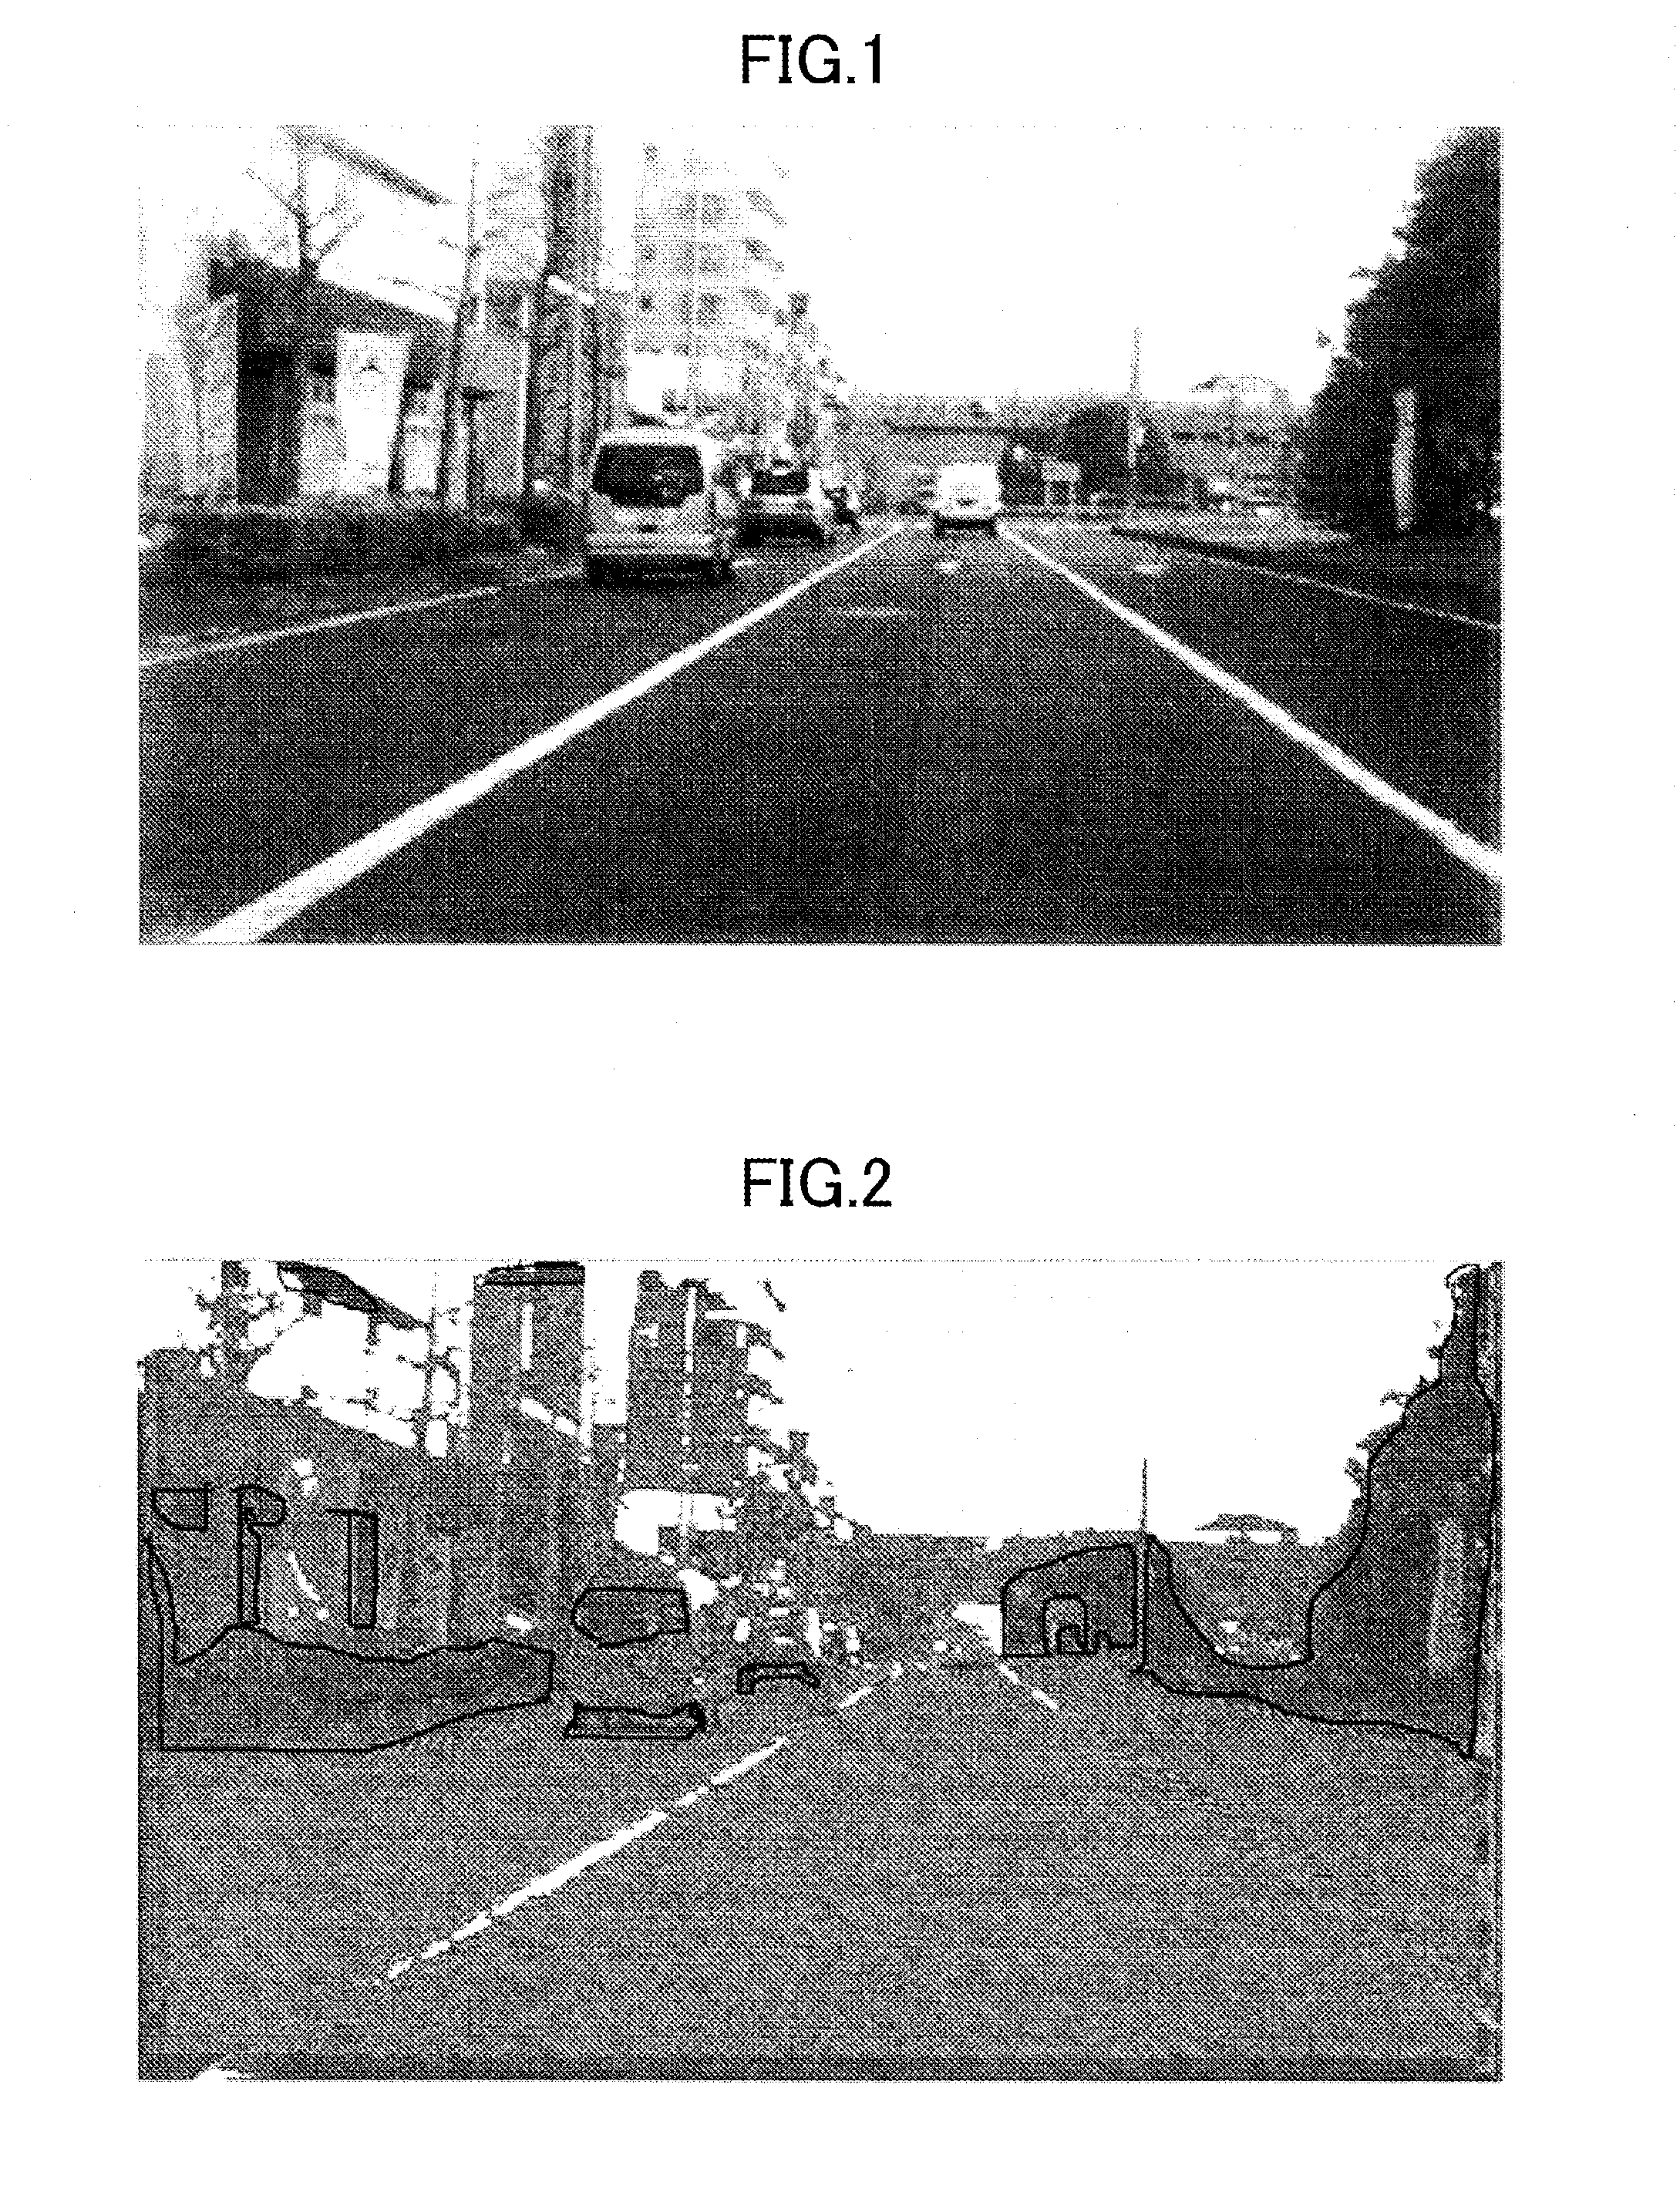 Method and system for detecting vehicle position by employing polarization image